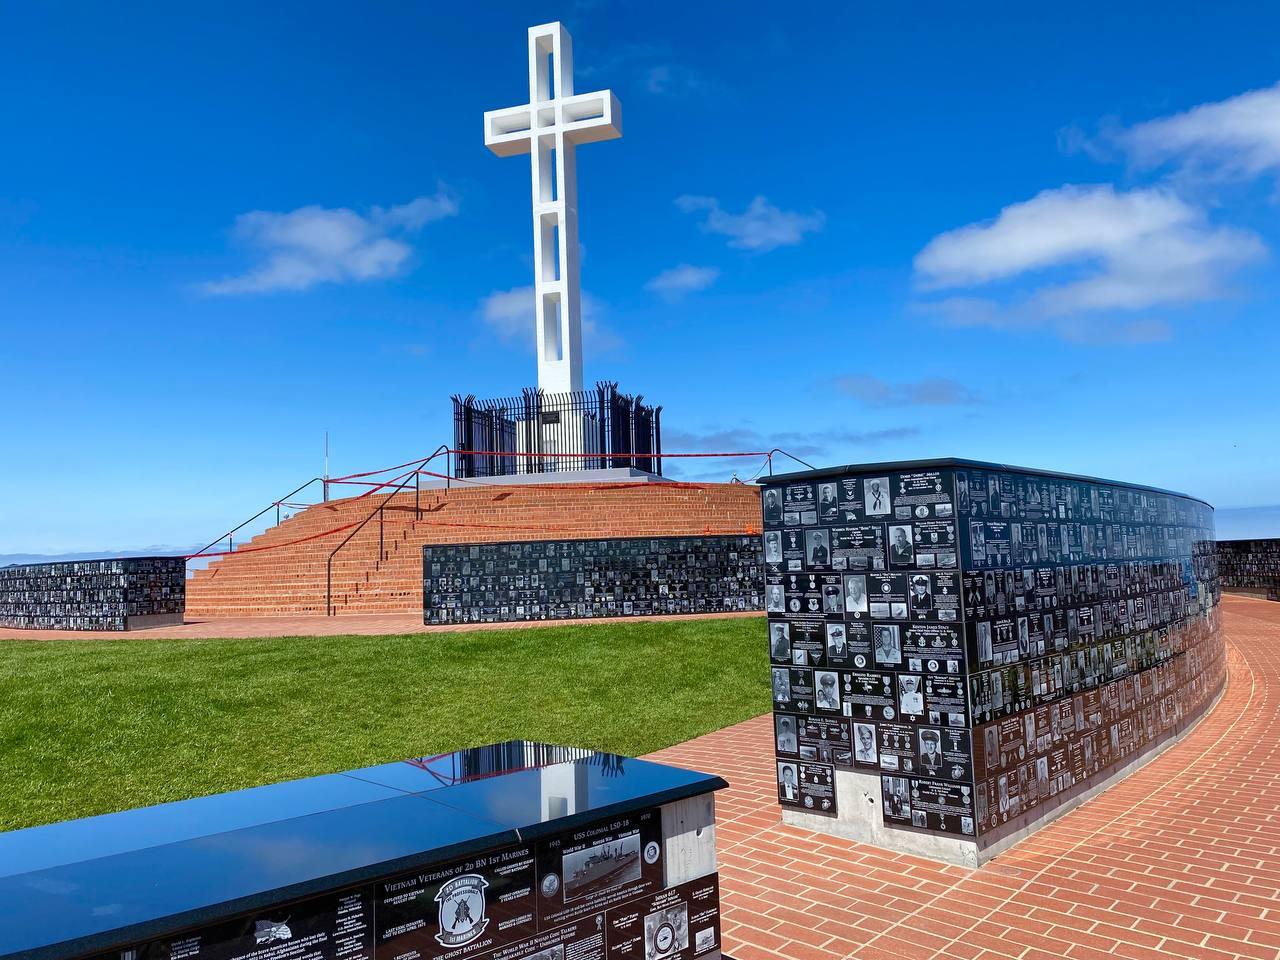 San Diego’s Mount Soledad: The Perfect Place to Salute War Heroes